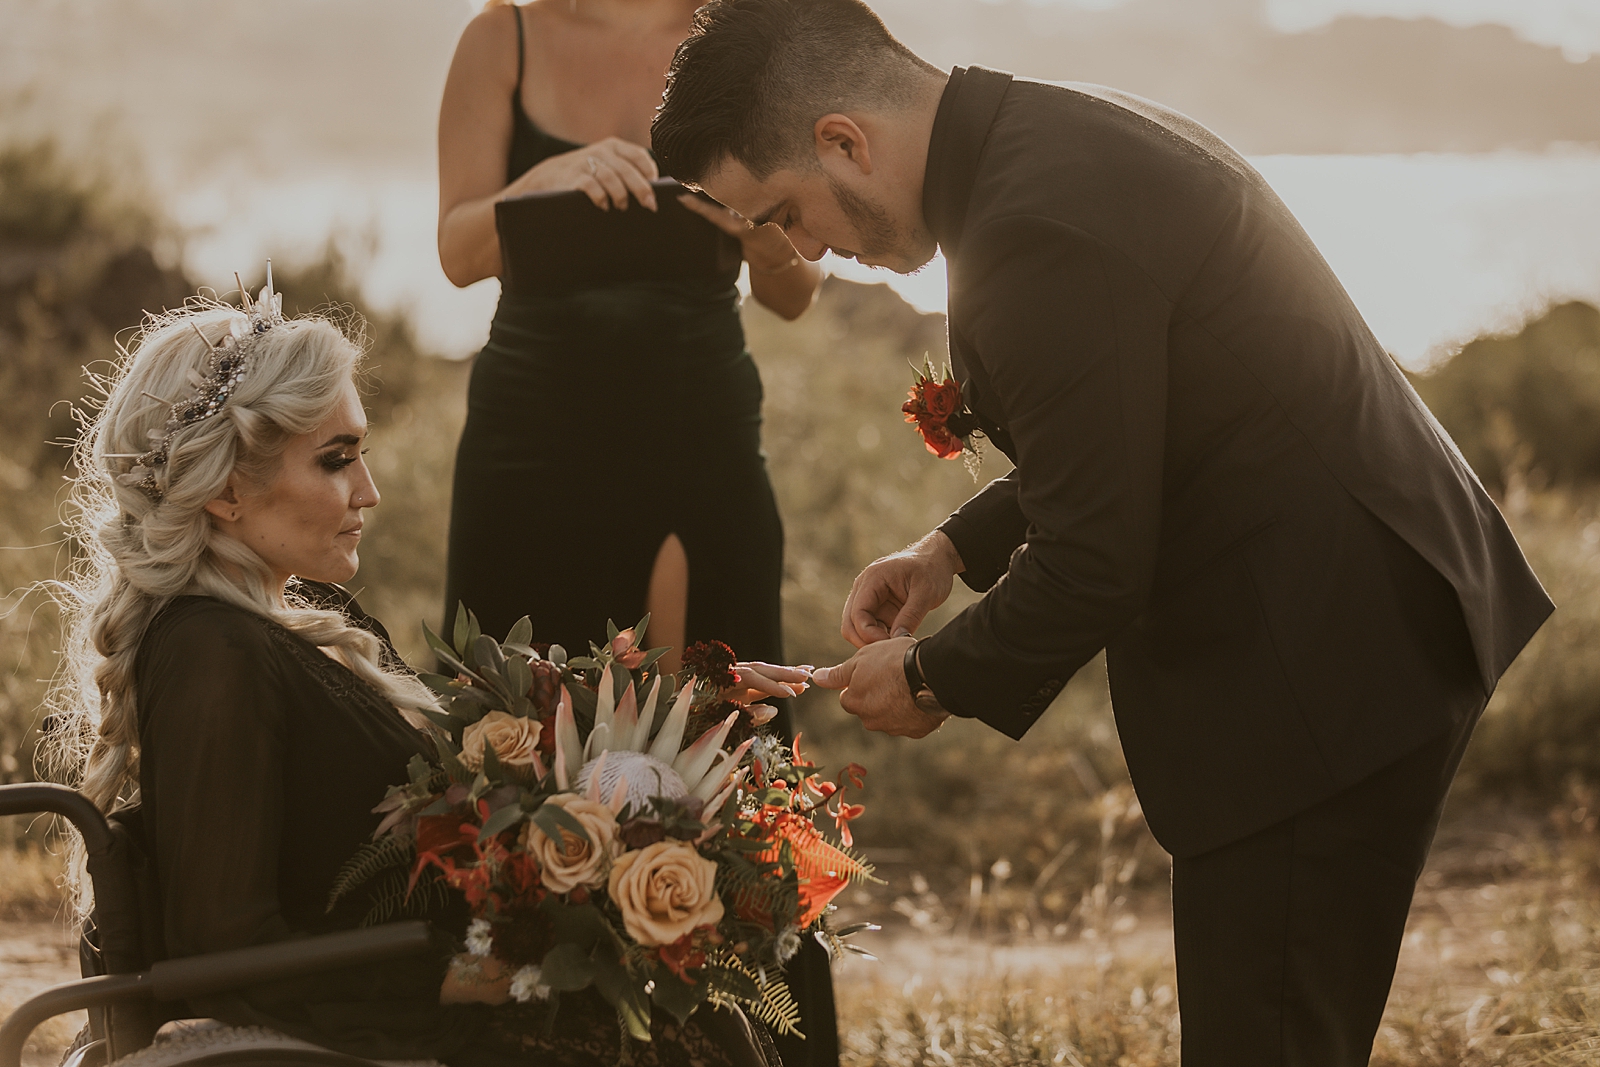 Groom leaning forward to out ring on Bride in wheel chair for outdoor Ceremony